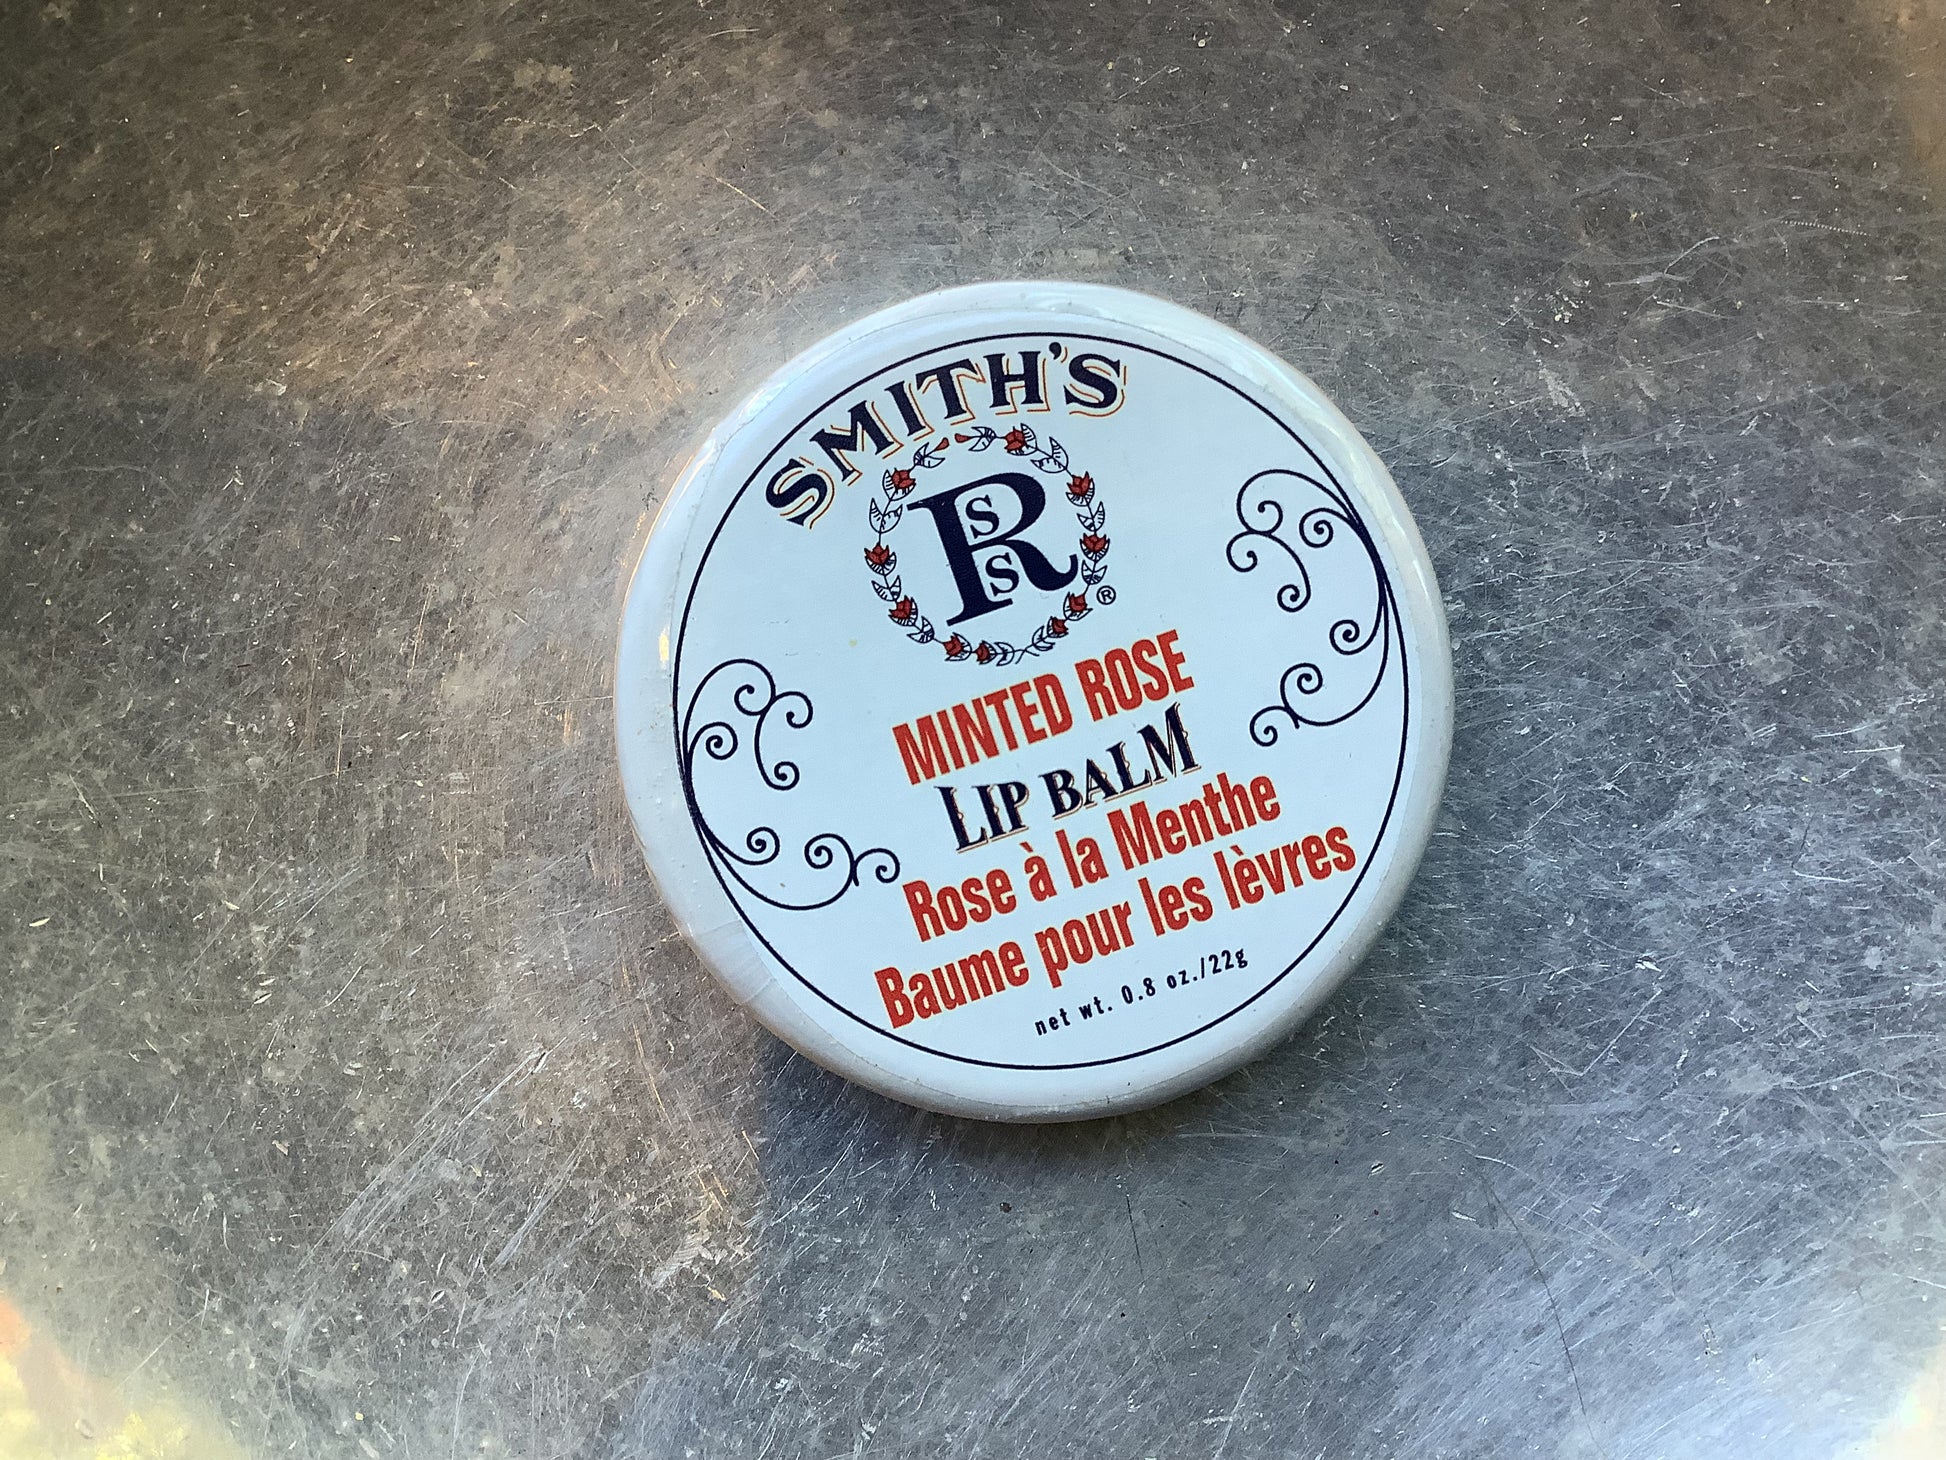 Container of Smith's minted rose lip balm